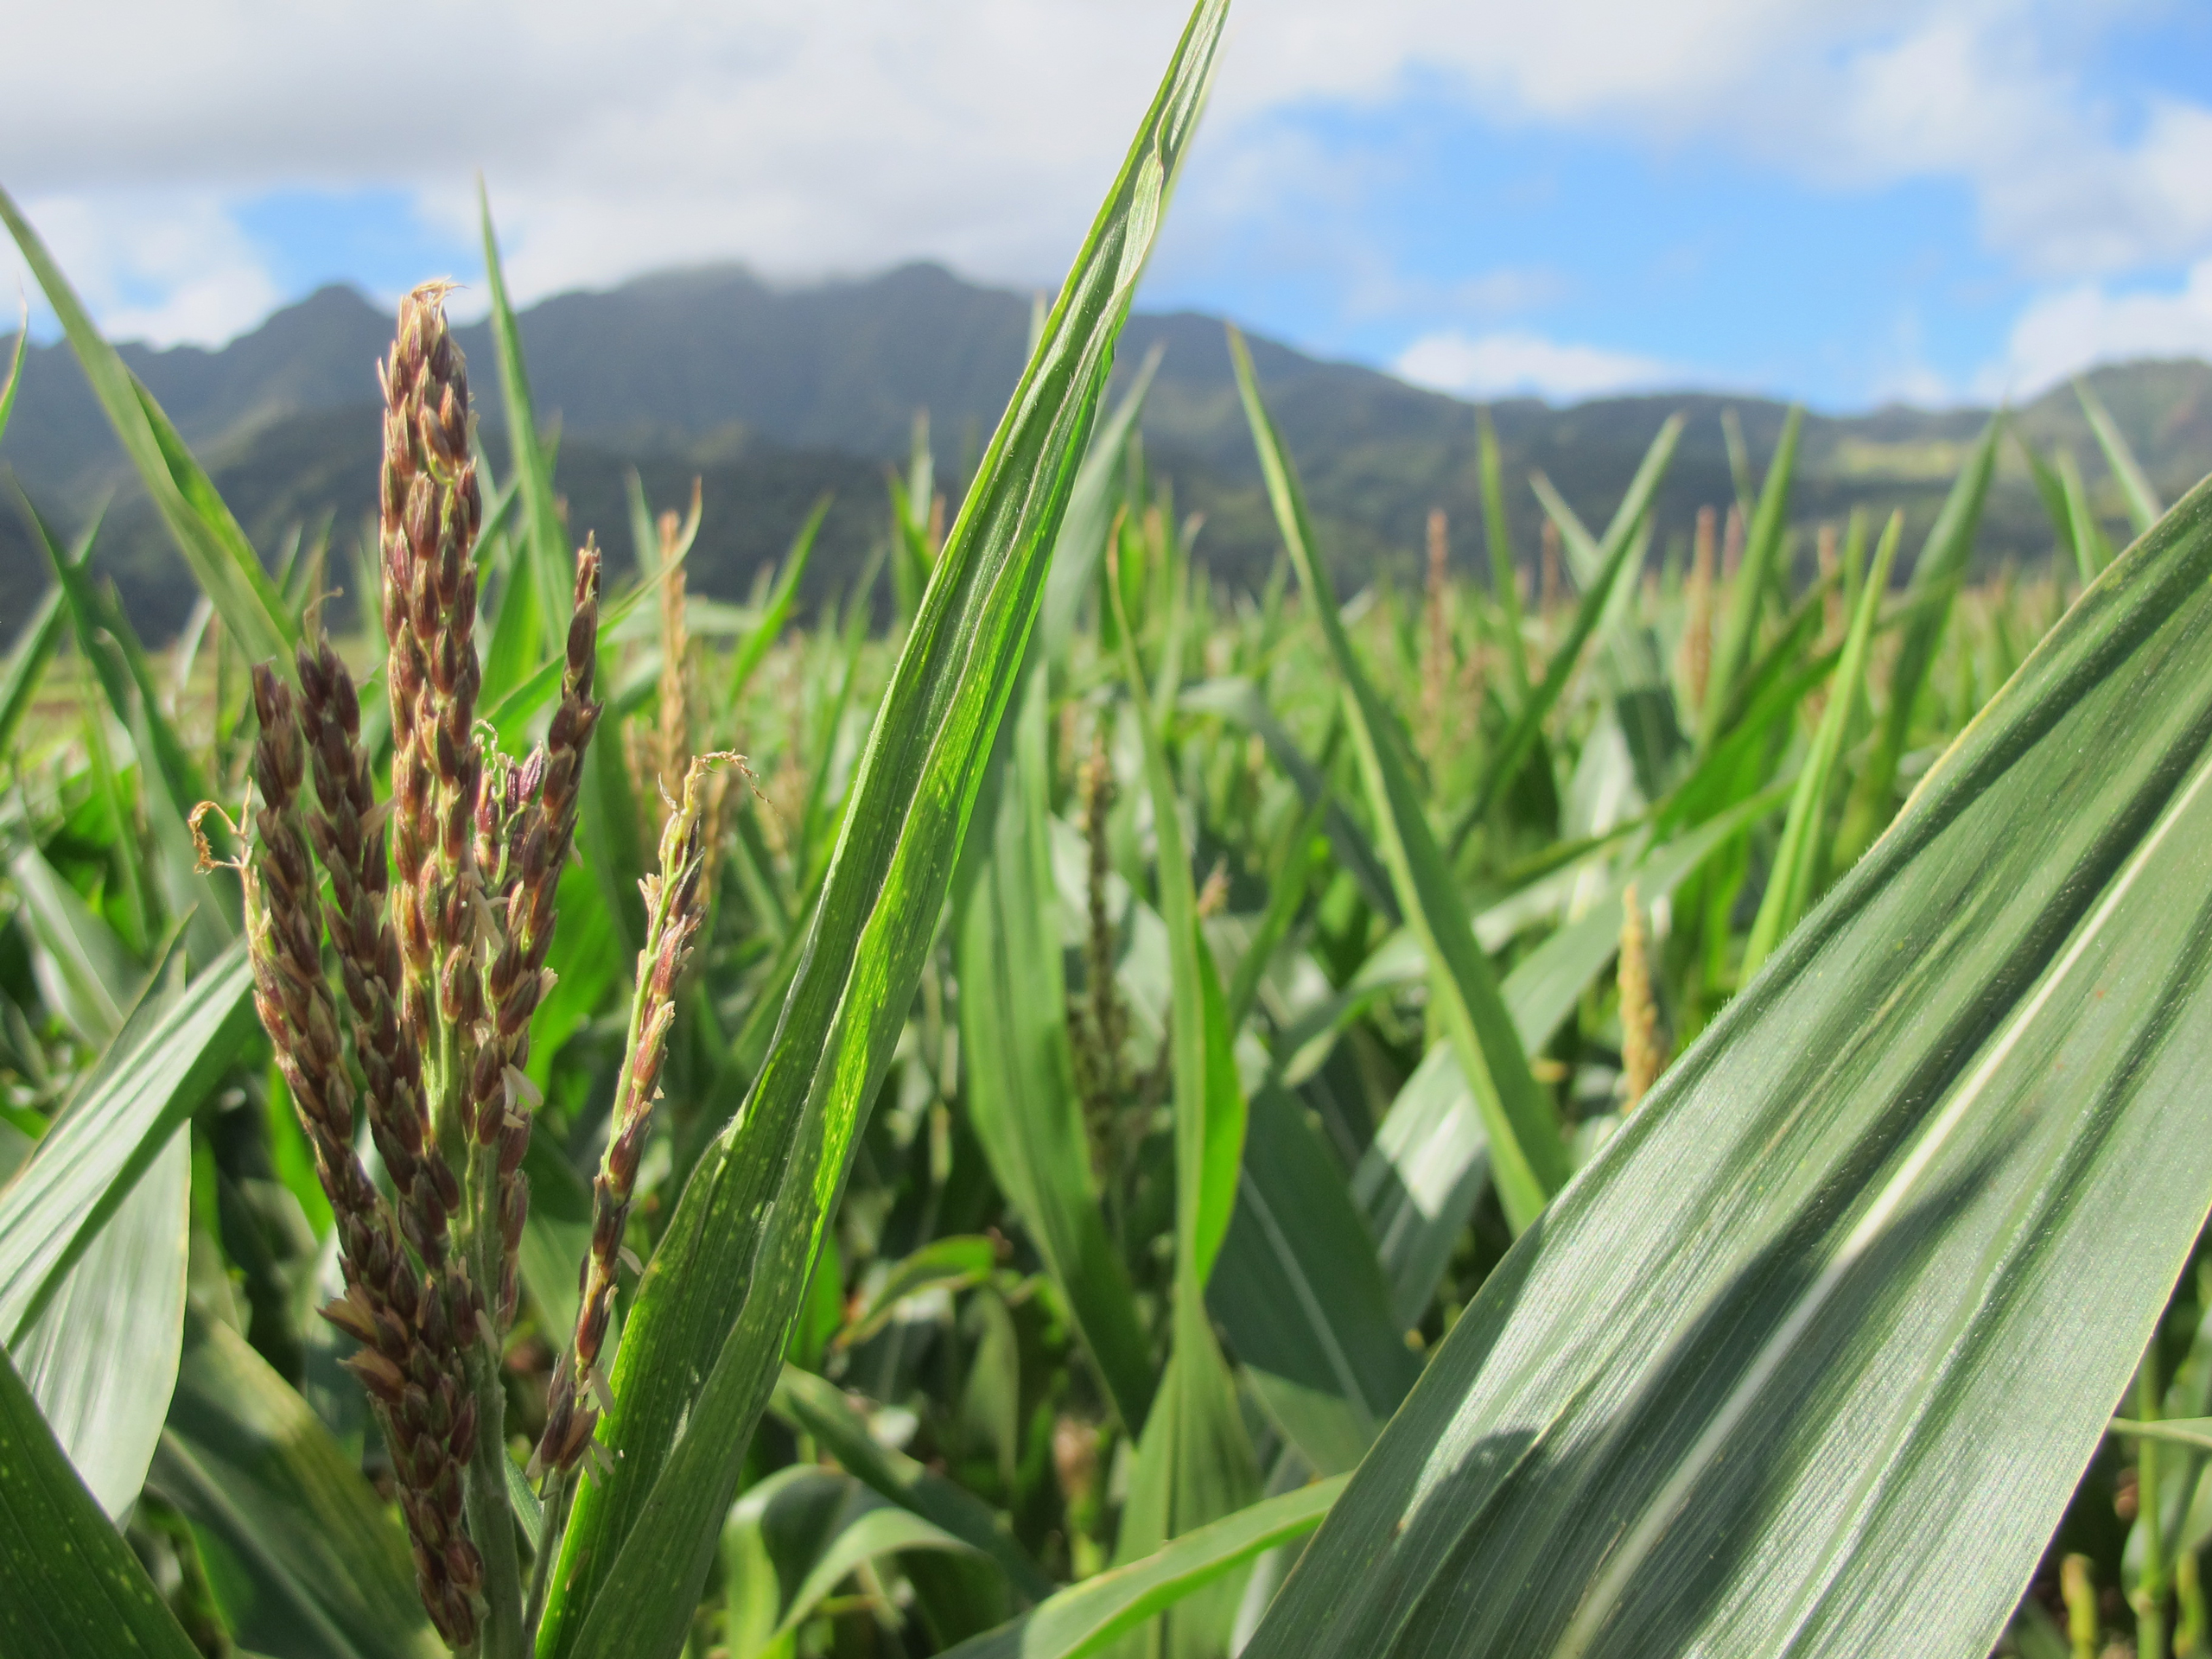 In this April 16, 2014 photo, a tassel of corn grows in a field on Pioneer Hi-Bred International land in Waialua, Hawaii. The nation’s leading corn seed companies have farms in Hawaii, but their fields have become a flash point in a spreading debate over genetic engineering in agriculture. (AP Photo/Audrey McAvoy)